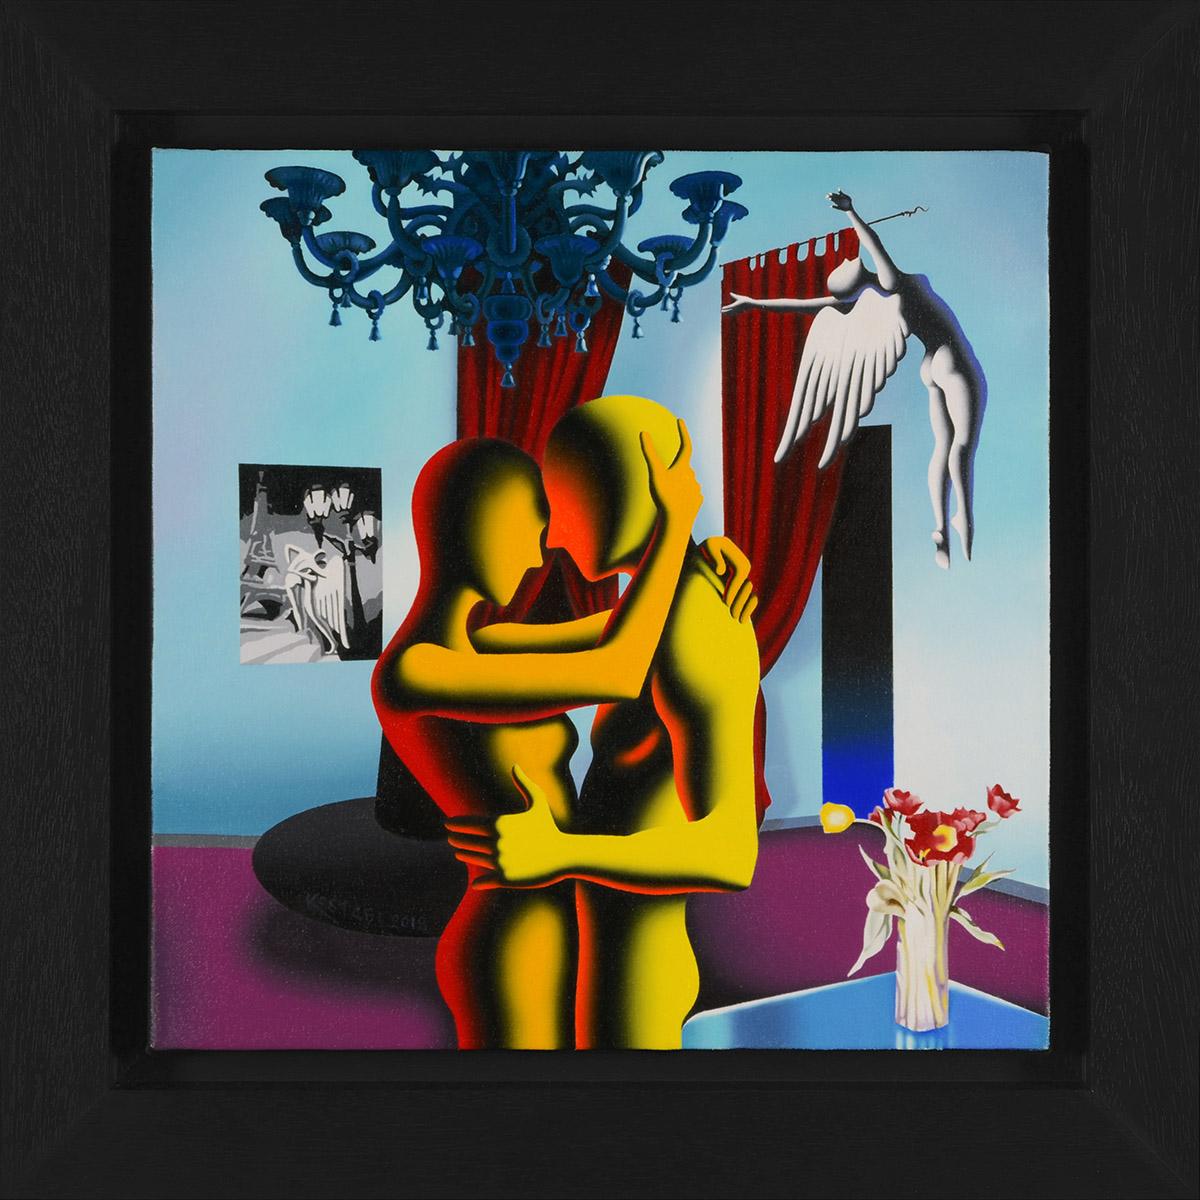 Interior Passion - Painting by Mark Kostabi